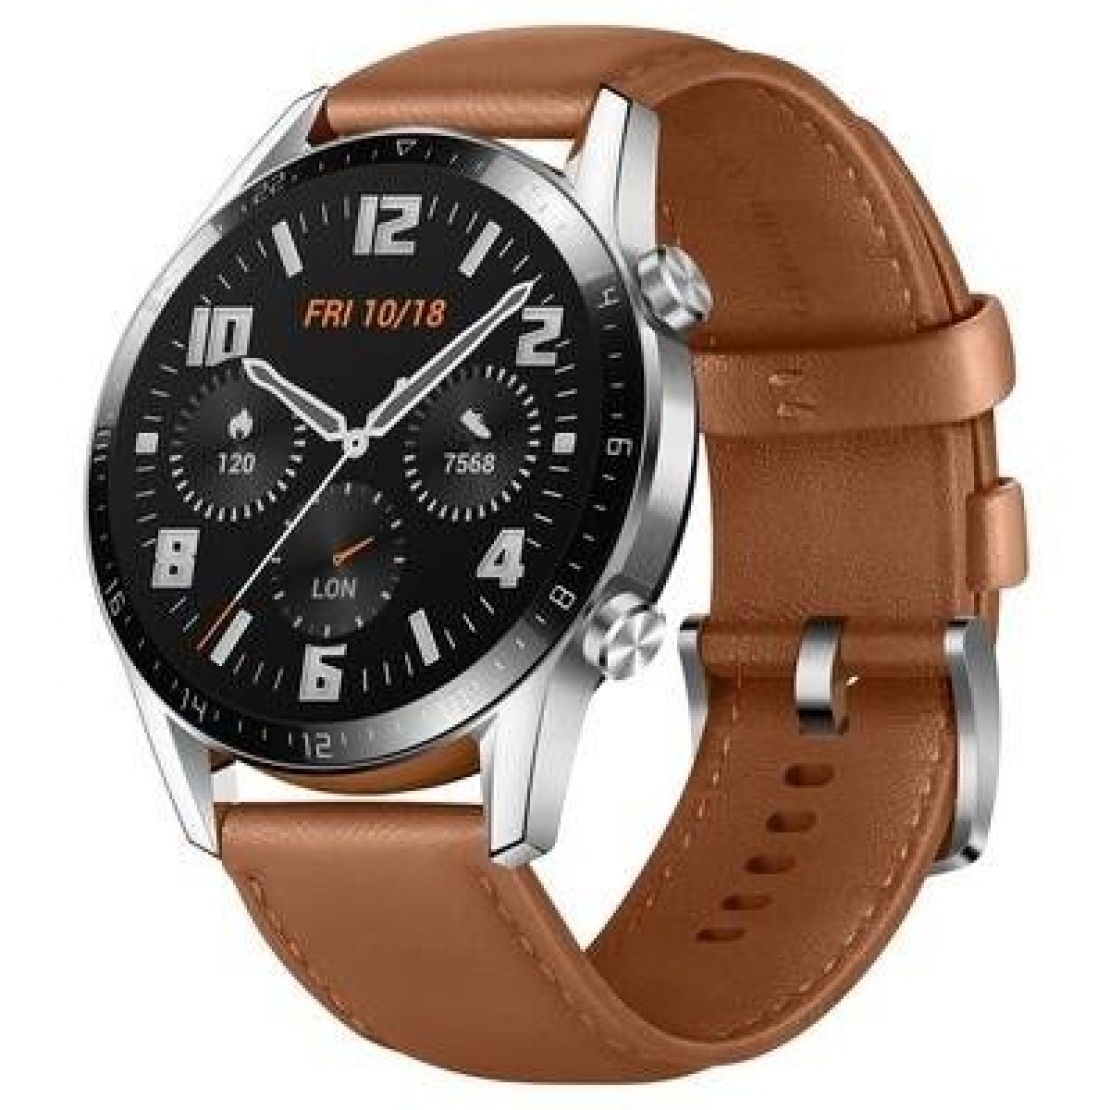 Huawei GT2 46mm Leather Smartwatch Brown